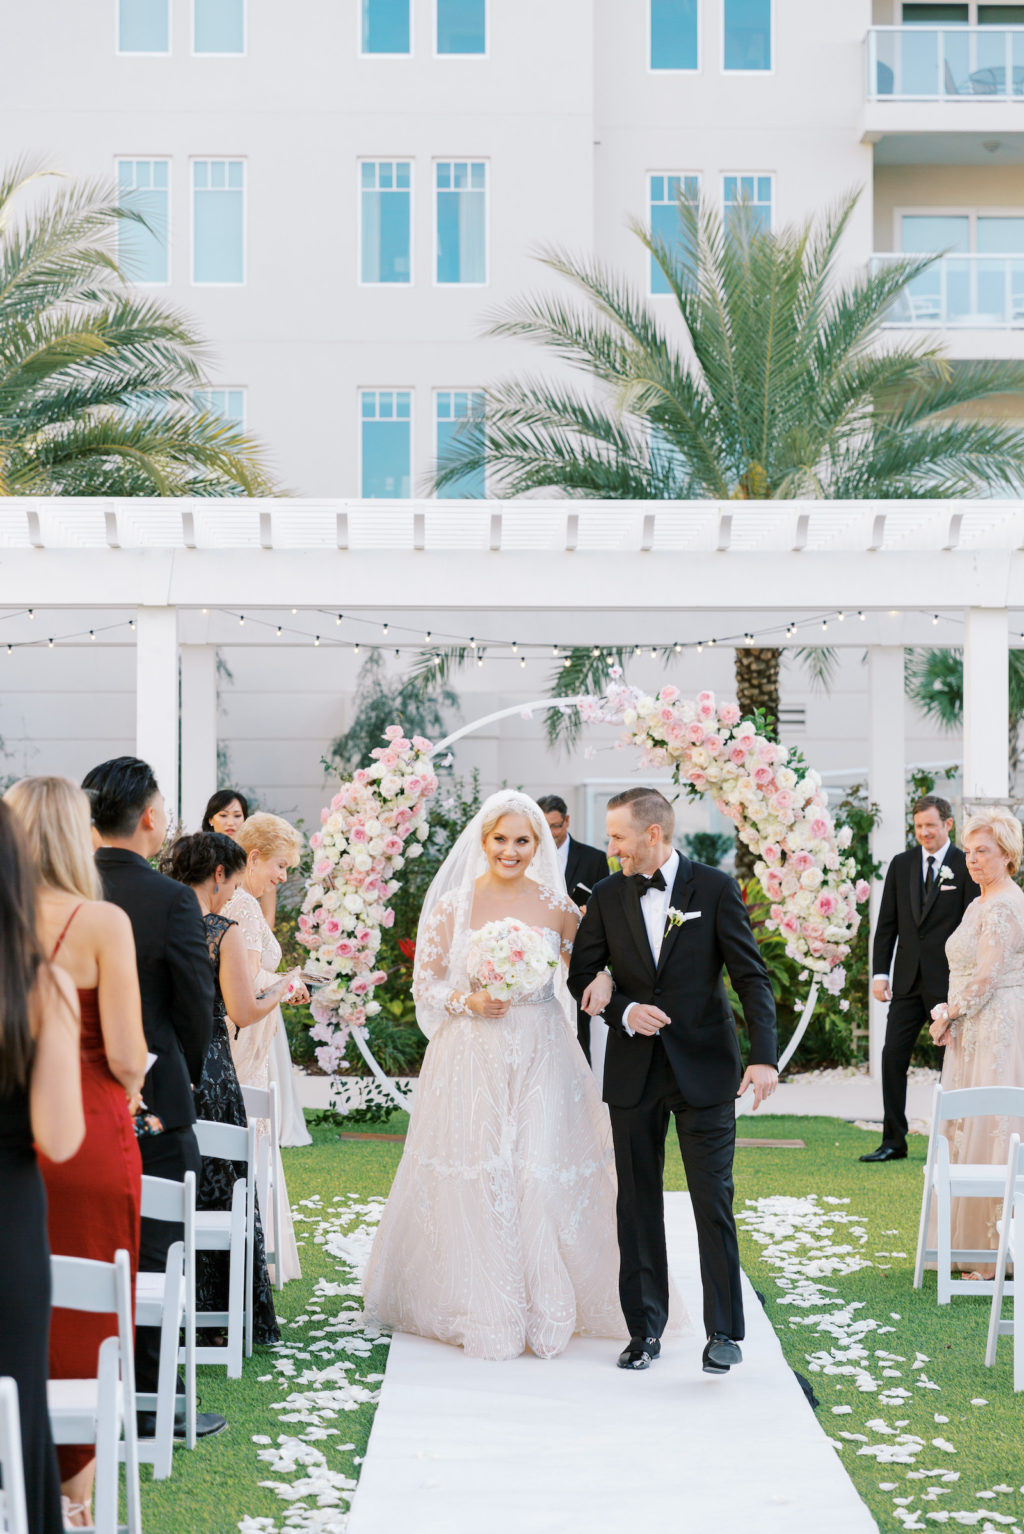 Bride and Groom Just Married Wedding Recessional During Elegant Outdoor Clearwater Lawn Ceremon at Belleview Inn, Garden Inspired Decor with Large Floral Circle Arch Under Pergola, with Pink Cherry Blossoms, Ivory Roses, Blush Peonies, and White Hydrangeas, Bride Wearing Adam Zhoar A Line Wedding Dress, Groom in Classic Black Giorgio Armani Tux | Florida Luxury Wedding Planner Parties A'La Carte | Tampa Bay Wedding Florist Bruce Wayne Florals | South Tampa Bridal Boutique Isabel O'Neil Bridal Collection